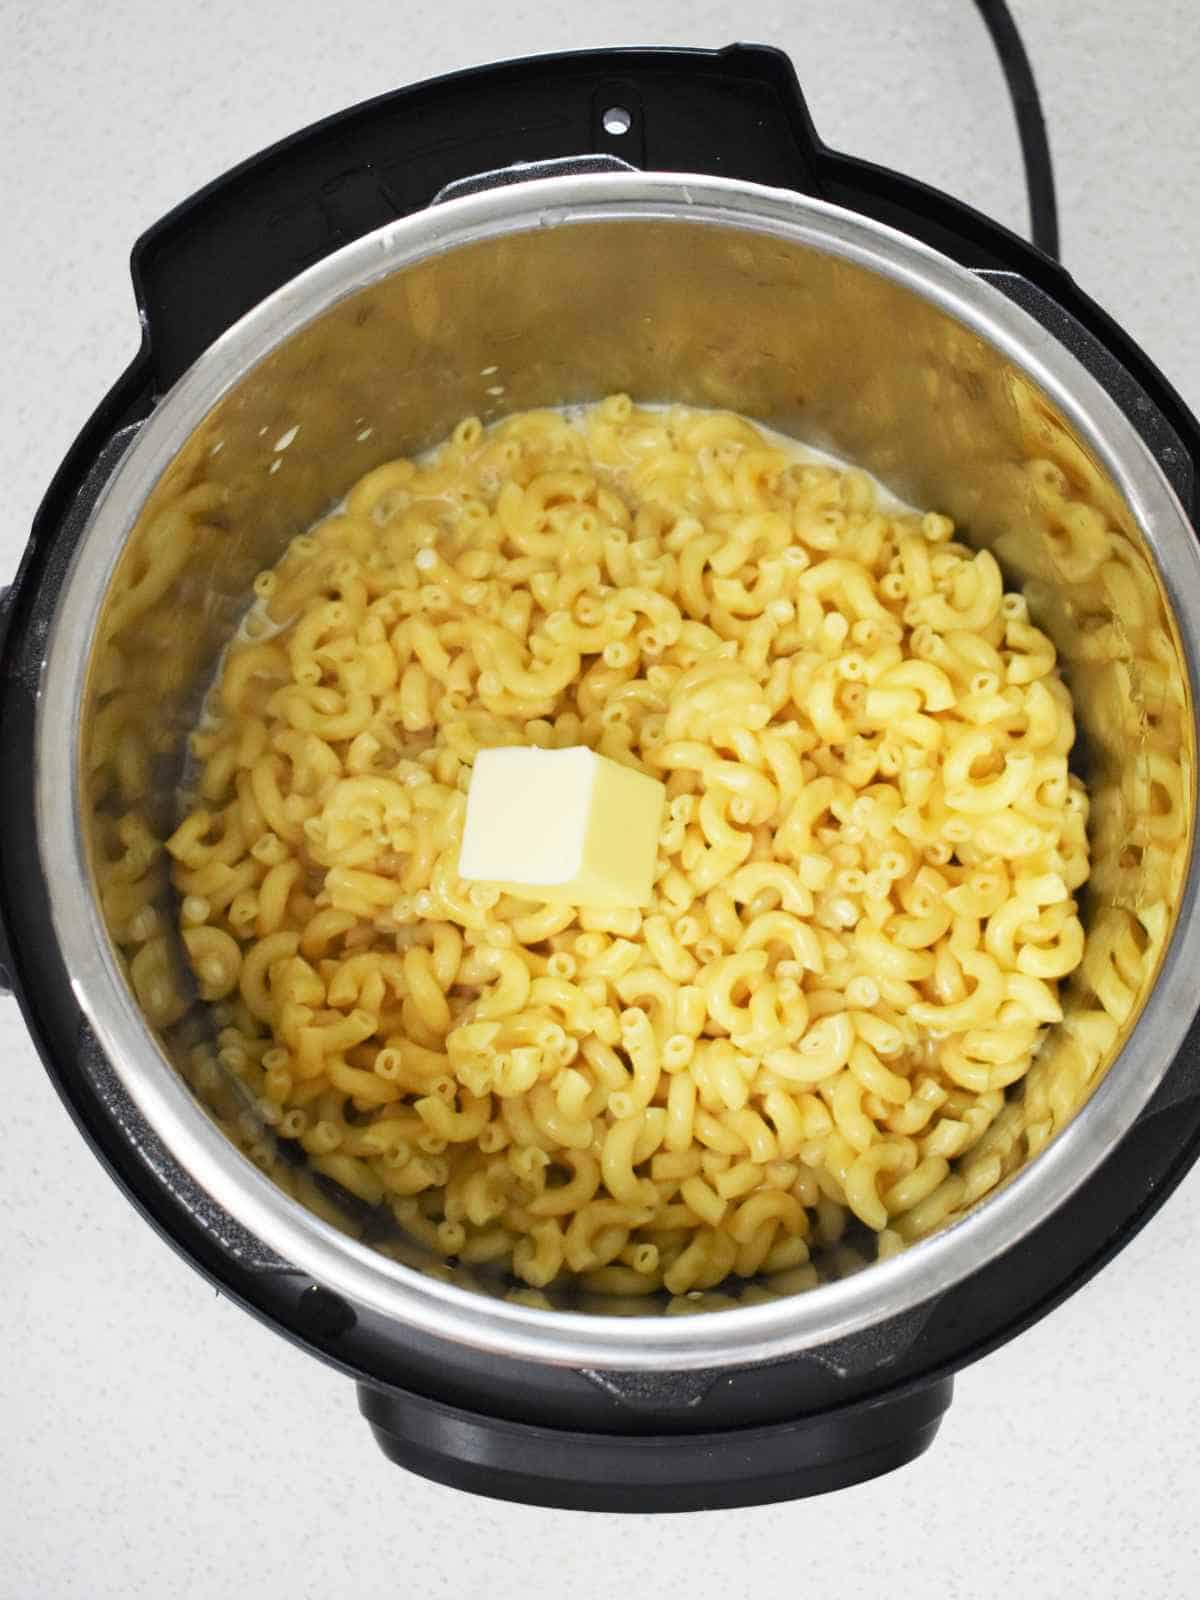 milk and butter added to elbow macaroni in an instant pot.